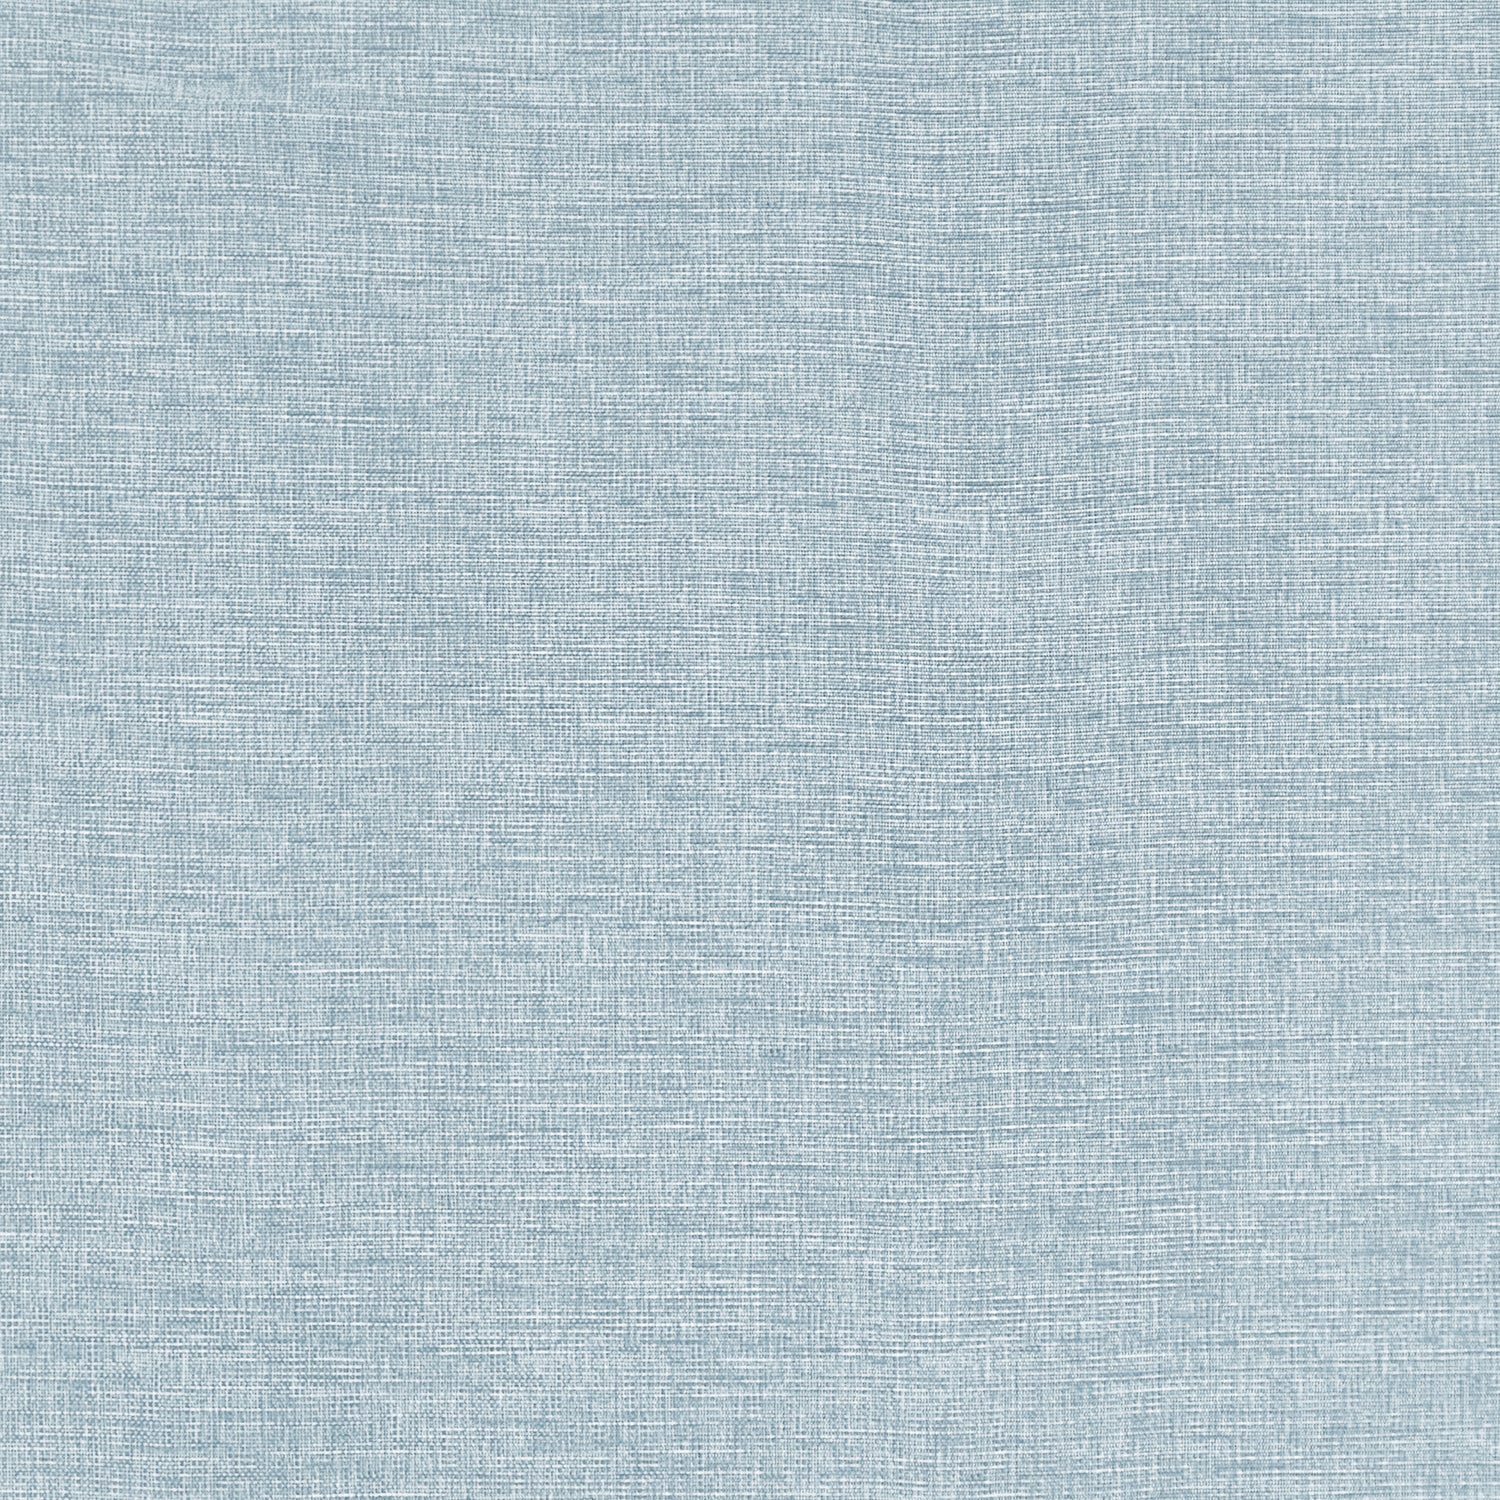 Finley fabric in chambray color - pattern number W81605 - by Thibaut in the Locale collection